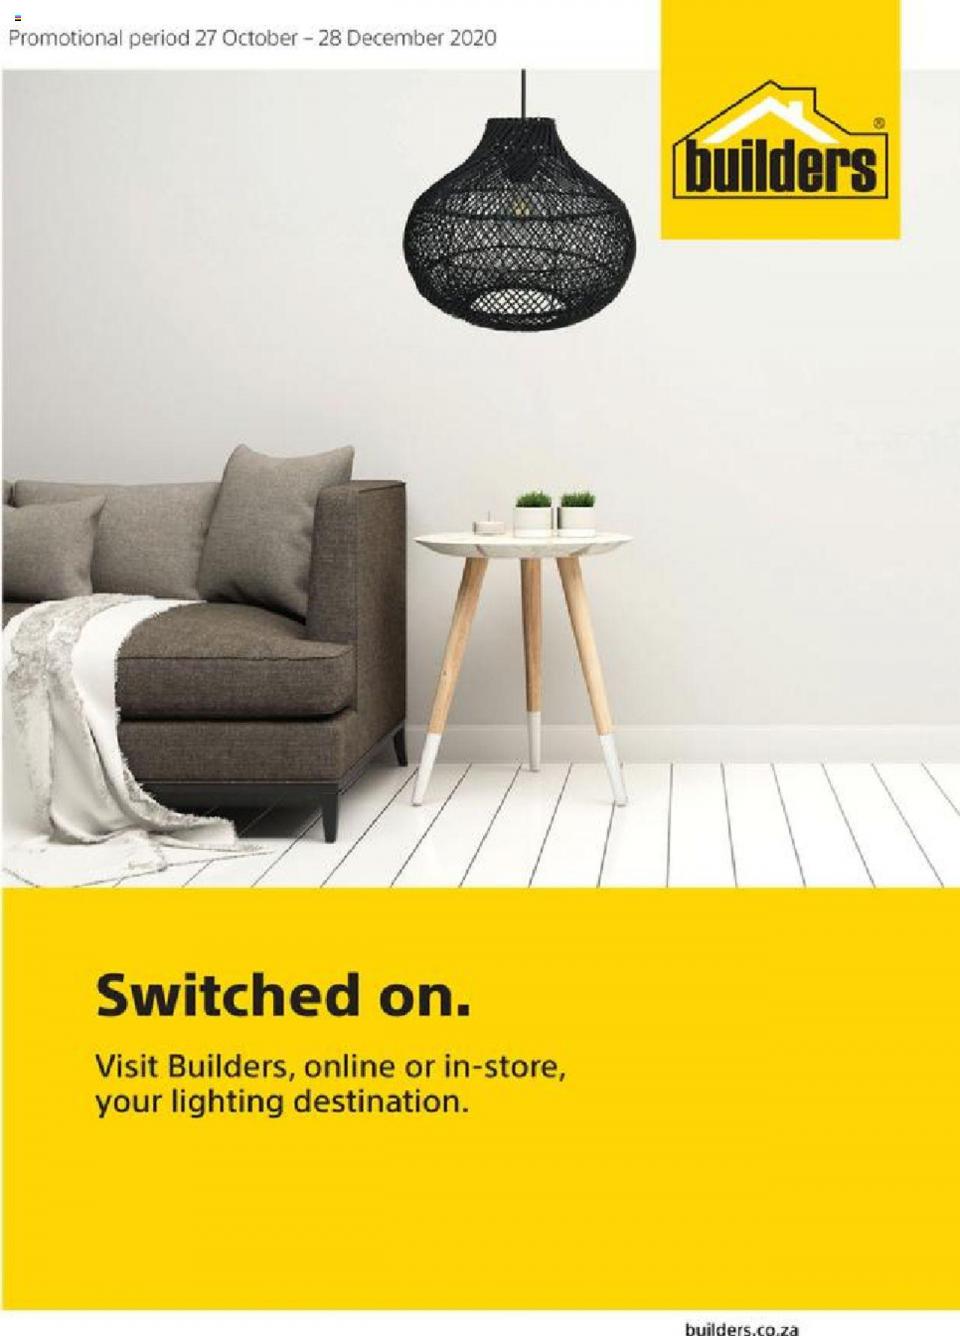 Builders Warehouse Specials Switched On 27 October 2020